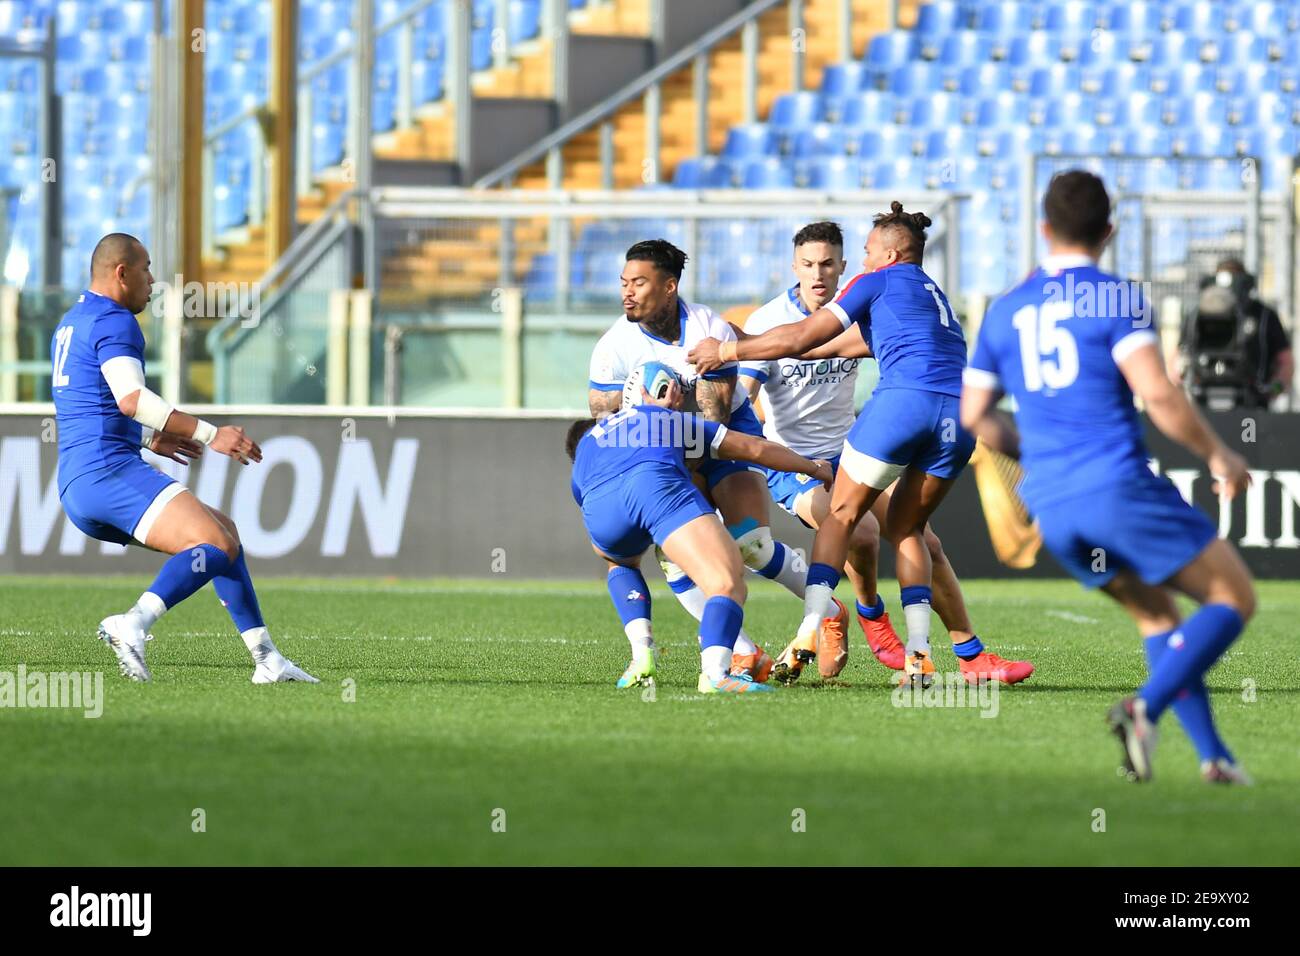 Rome, Italy. 6th Feb, 2021. Rome, Italy, Stadio Olimpico, February 06, 2021, Montanna Ioane (Italy) is tackled by Arthur Vincent (France) during Italy vs France - Rugby Six Nations match Credit: Carlo Cappuccitti/LPS/ZUMA Wire/Alamy Live News Stock Photo